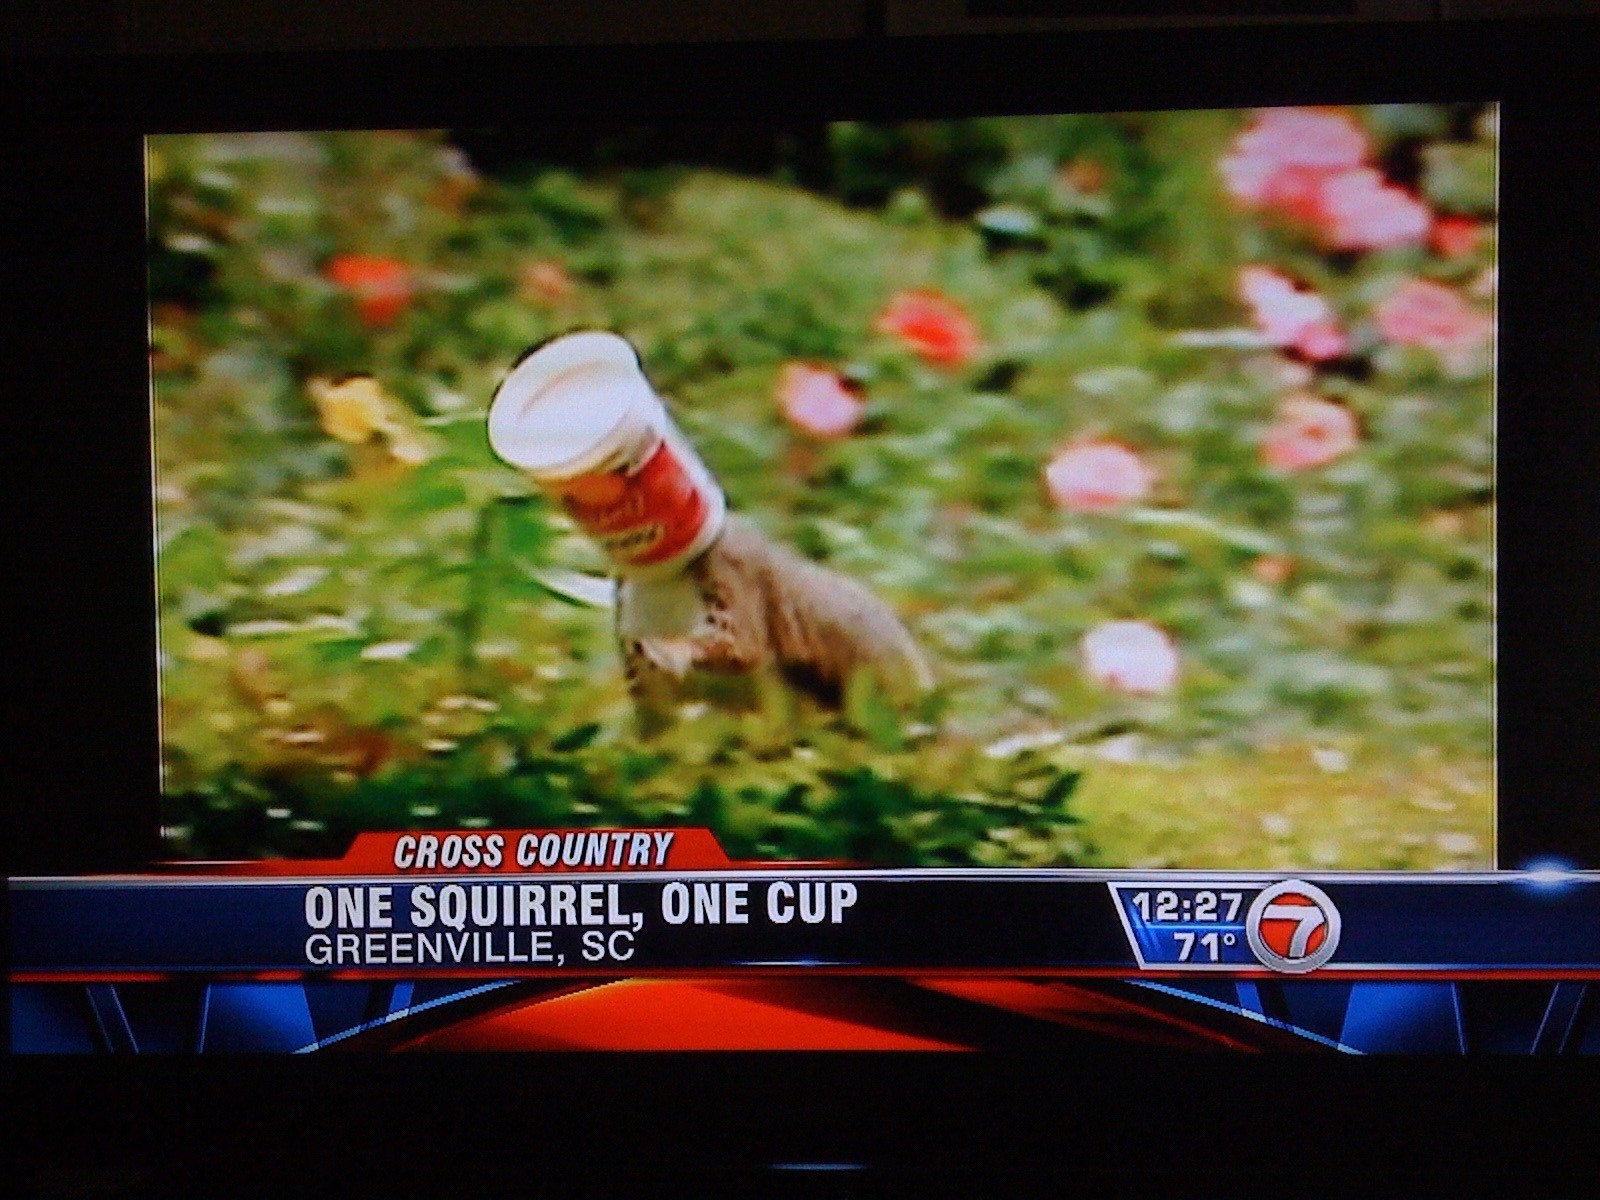 One squirrel, one cup...